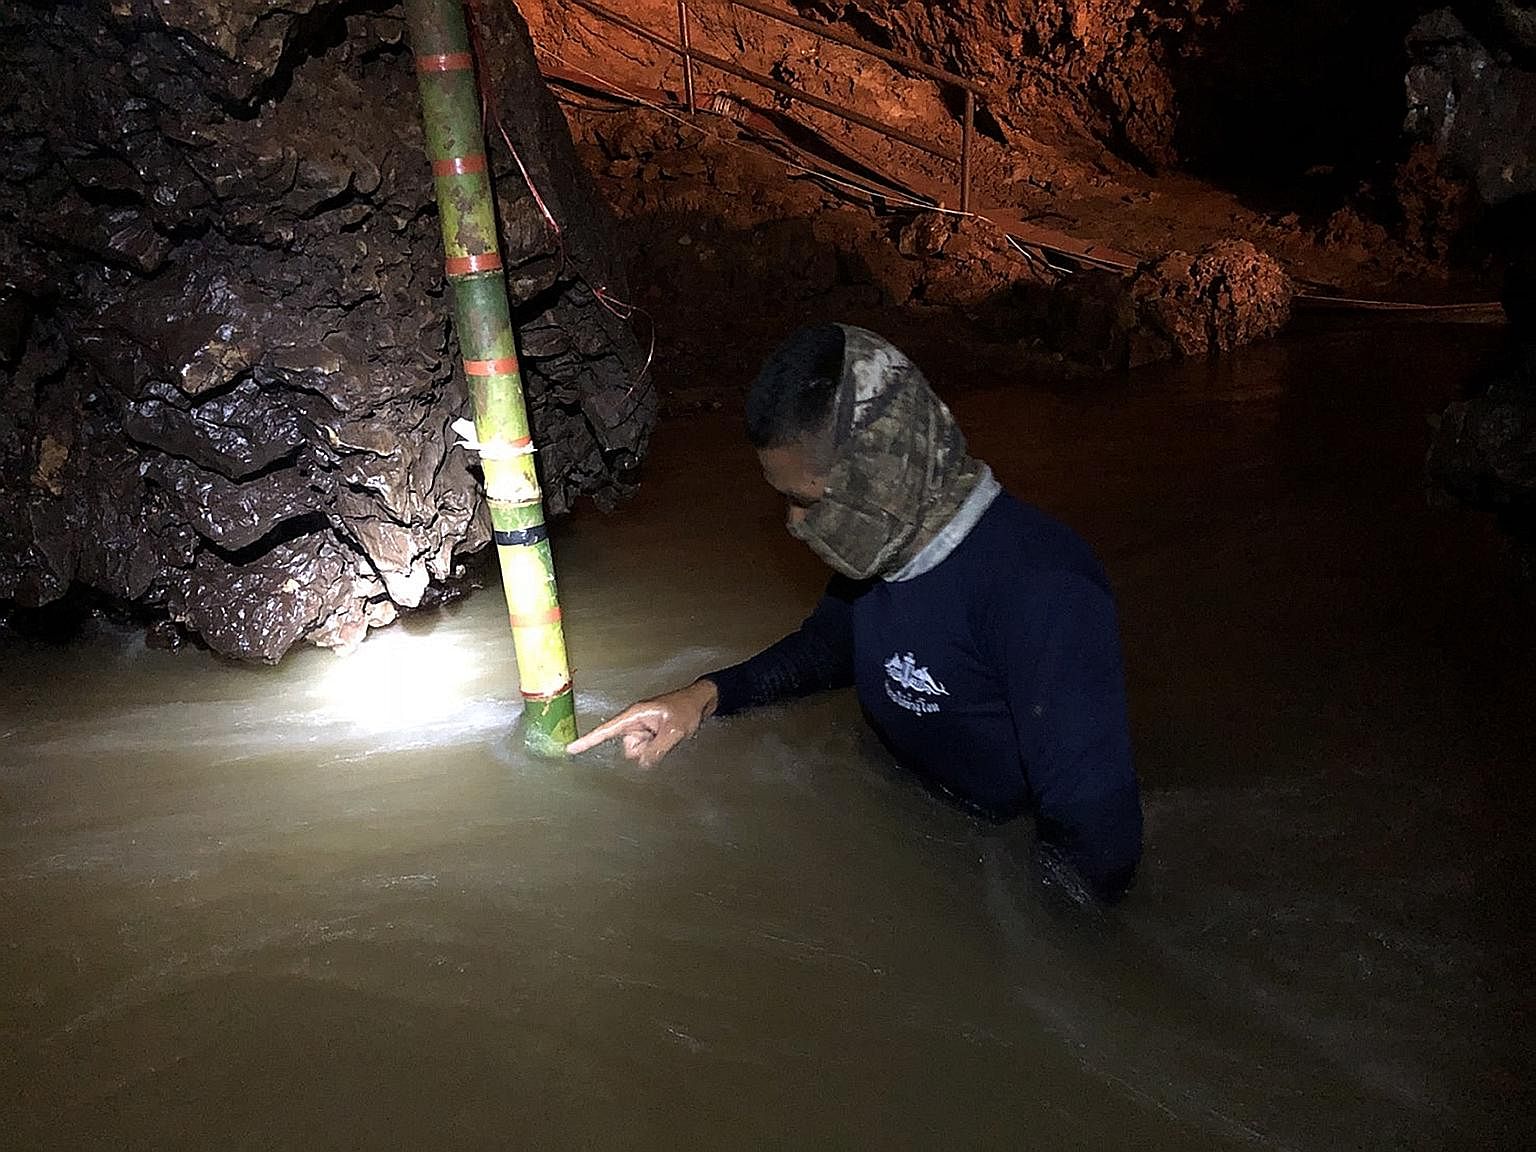 Heavy rain overnight yesterday flooded a chamber of the 10km-long Tham Luang cave in northern Thailand where 12 members of a youth soccer team and their coach were believed to be trapped, as rescue teams scoured the cave for signs of the missing. A h